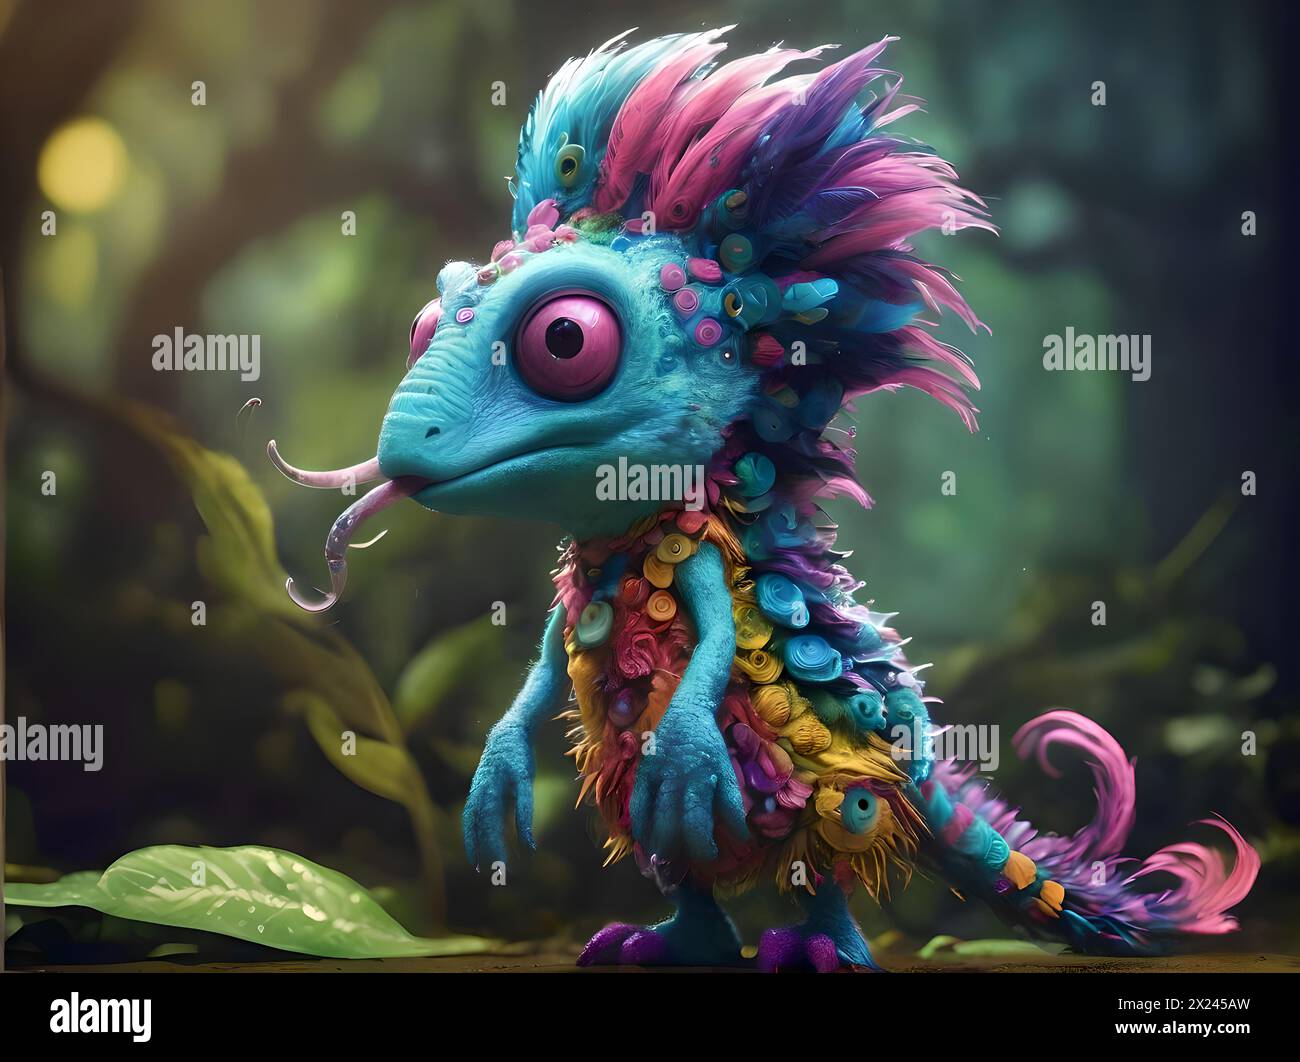 Whimsical and legendary monster, magical creature, fairy tale creature Stock Photo